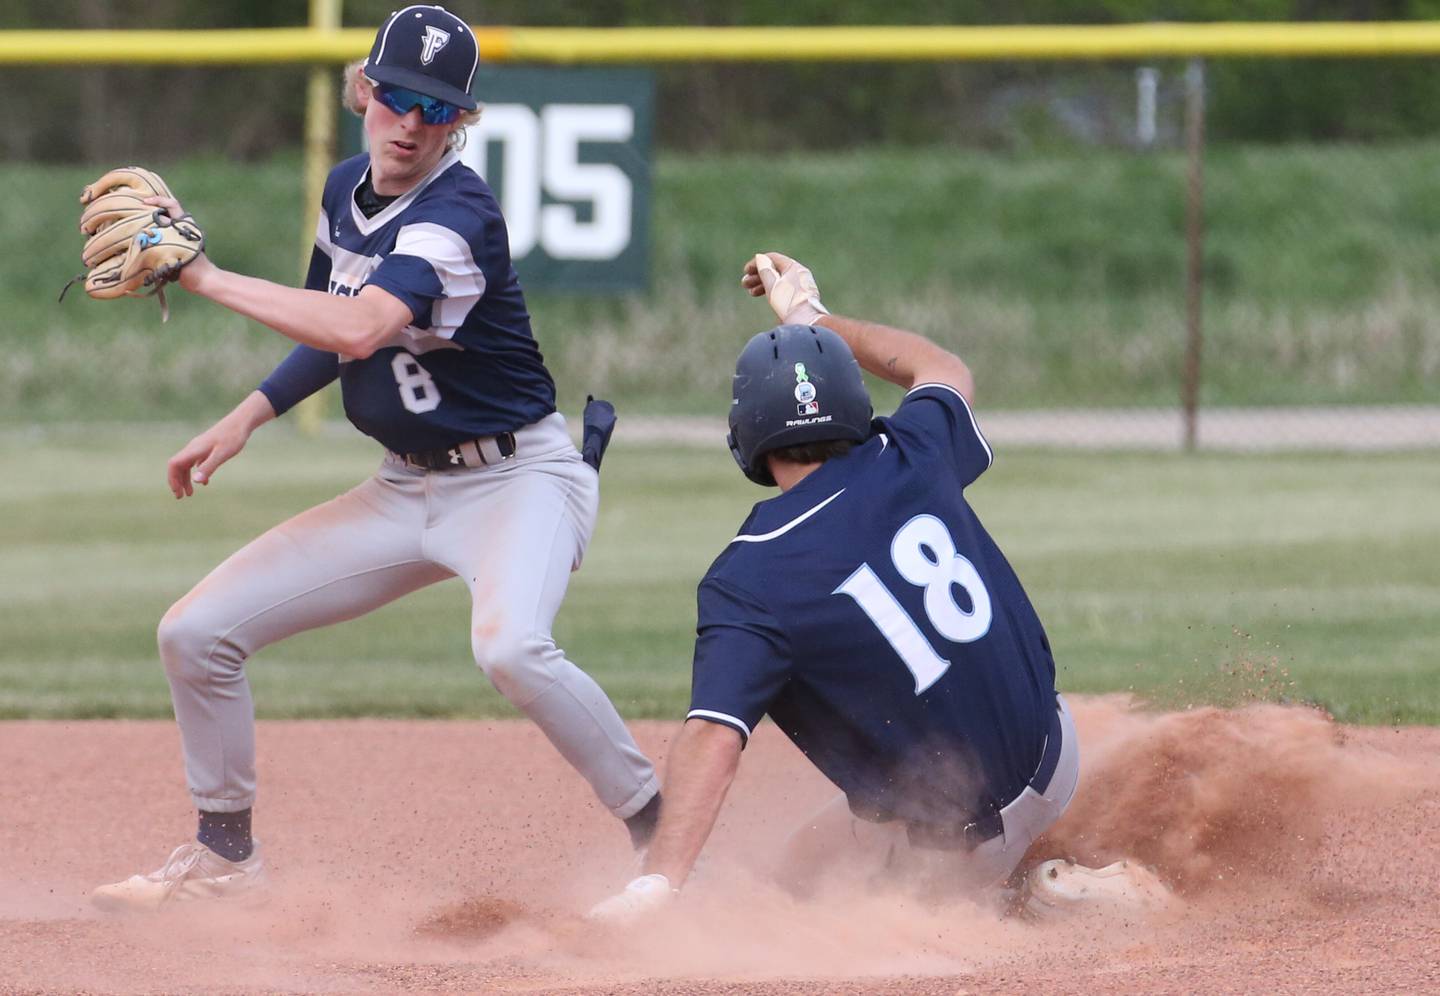 Fieldcrest's Jordan Heider takes a throw on a steal attempt at second base by Prairie Centra's Clayton Behler in a game last season at Fieldcrest Middle School in Wenona.